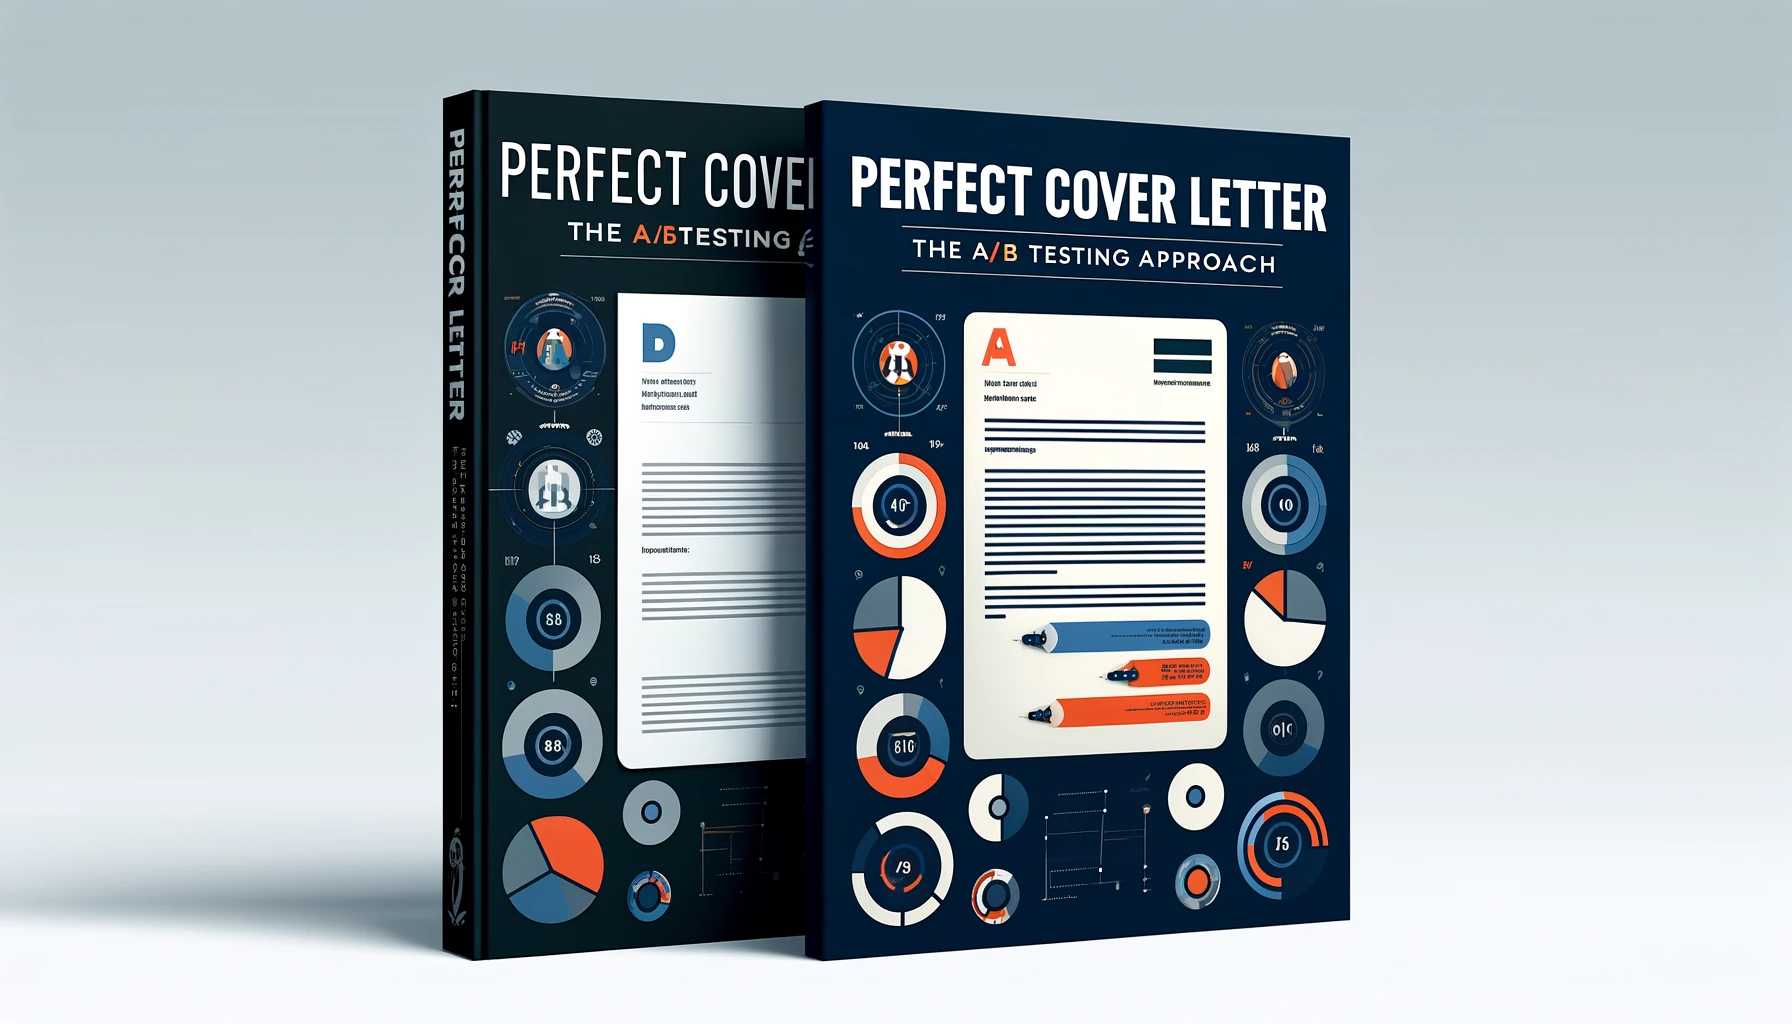 Perfect Cover Letter: The A/B Testing Approach